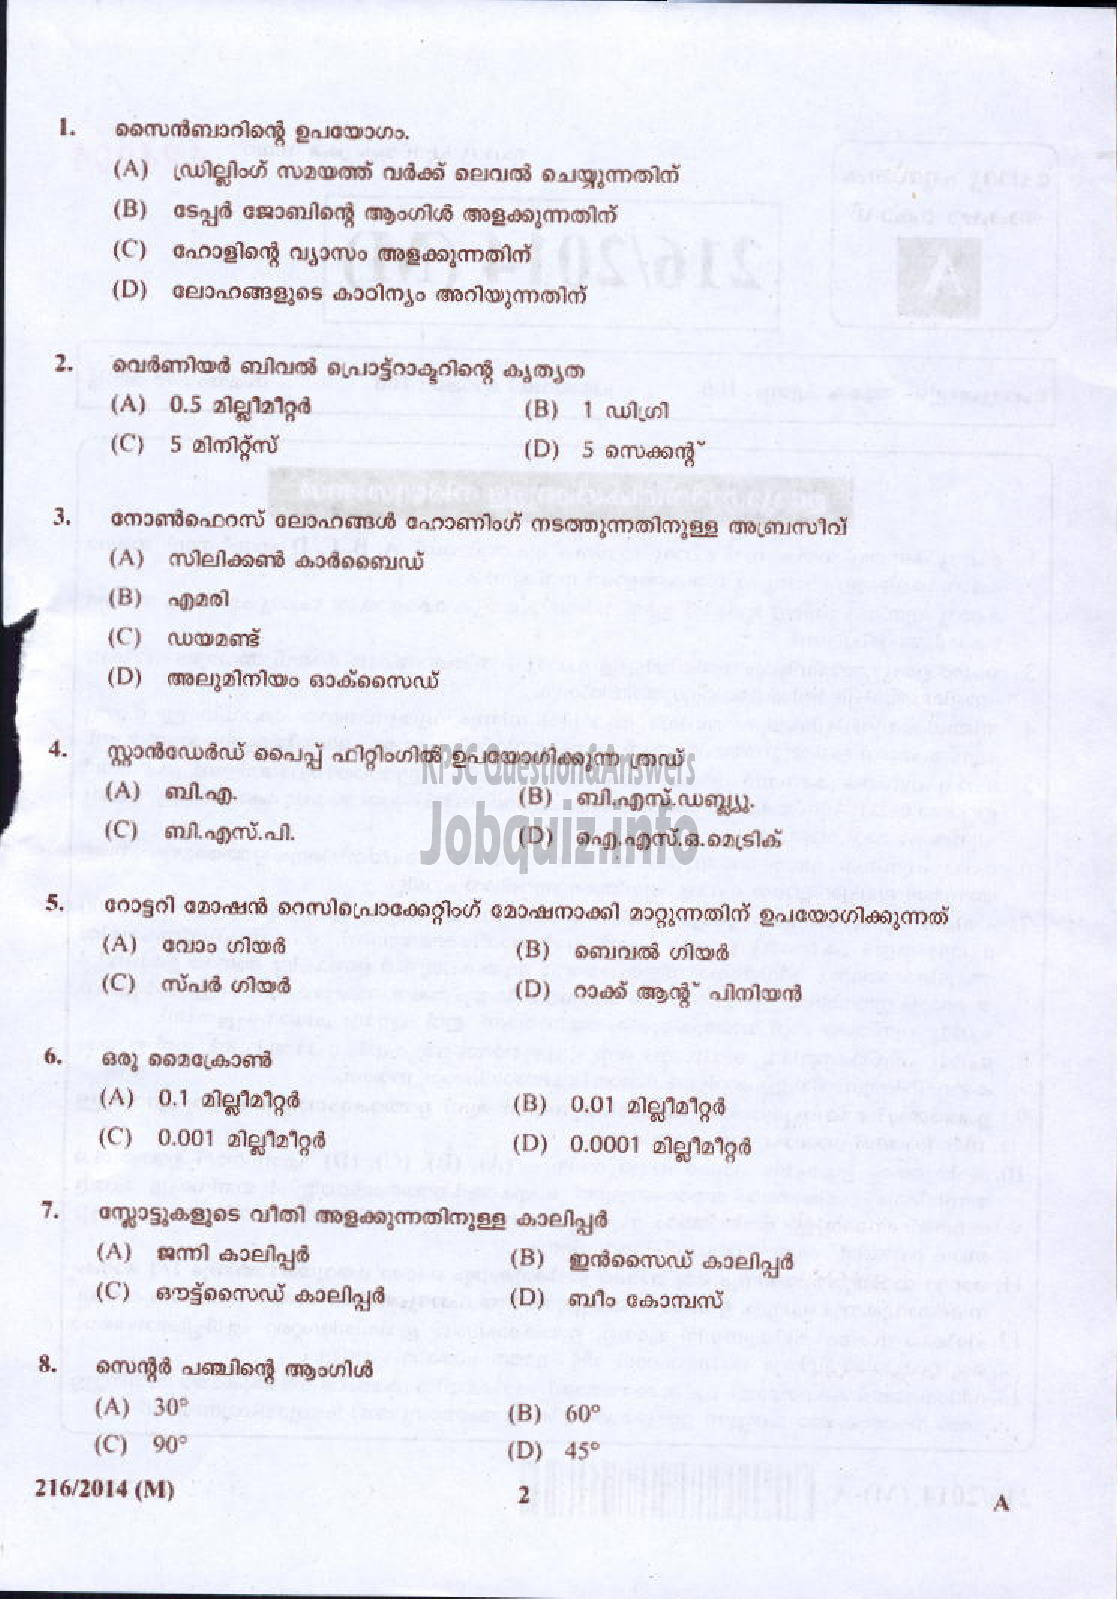 Kerala PSC Question Paper - FITTER AGRICULTURE-2